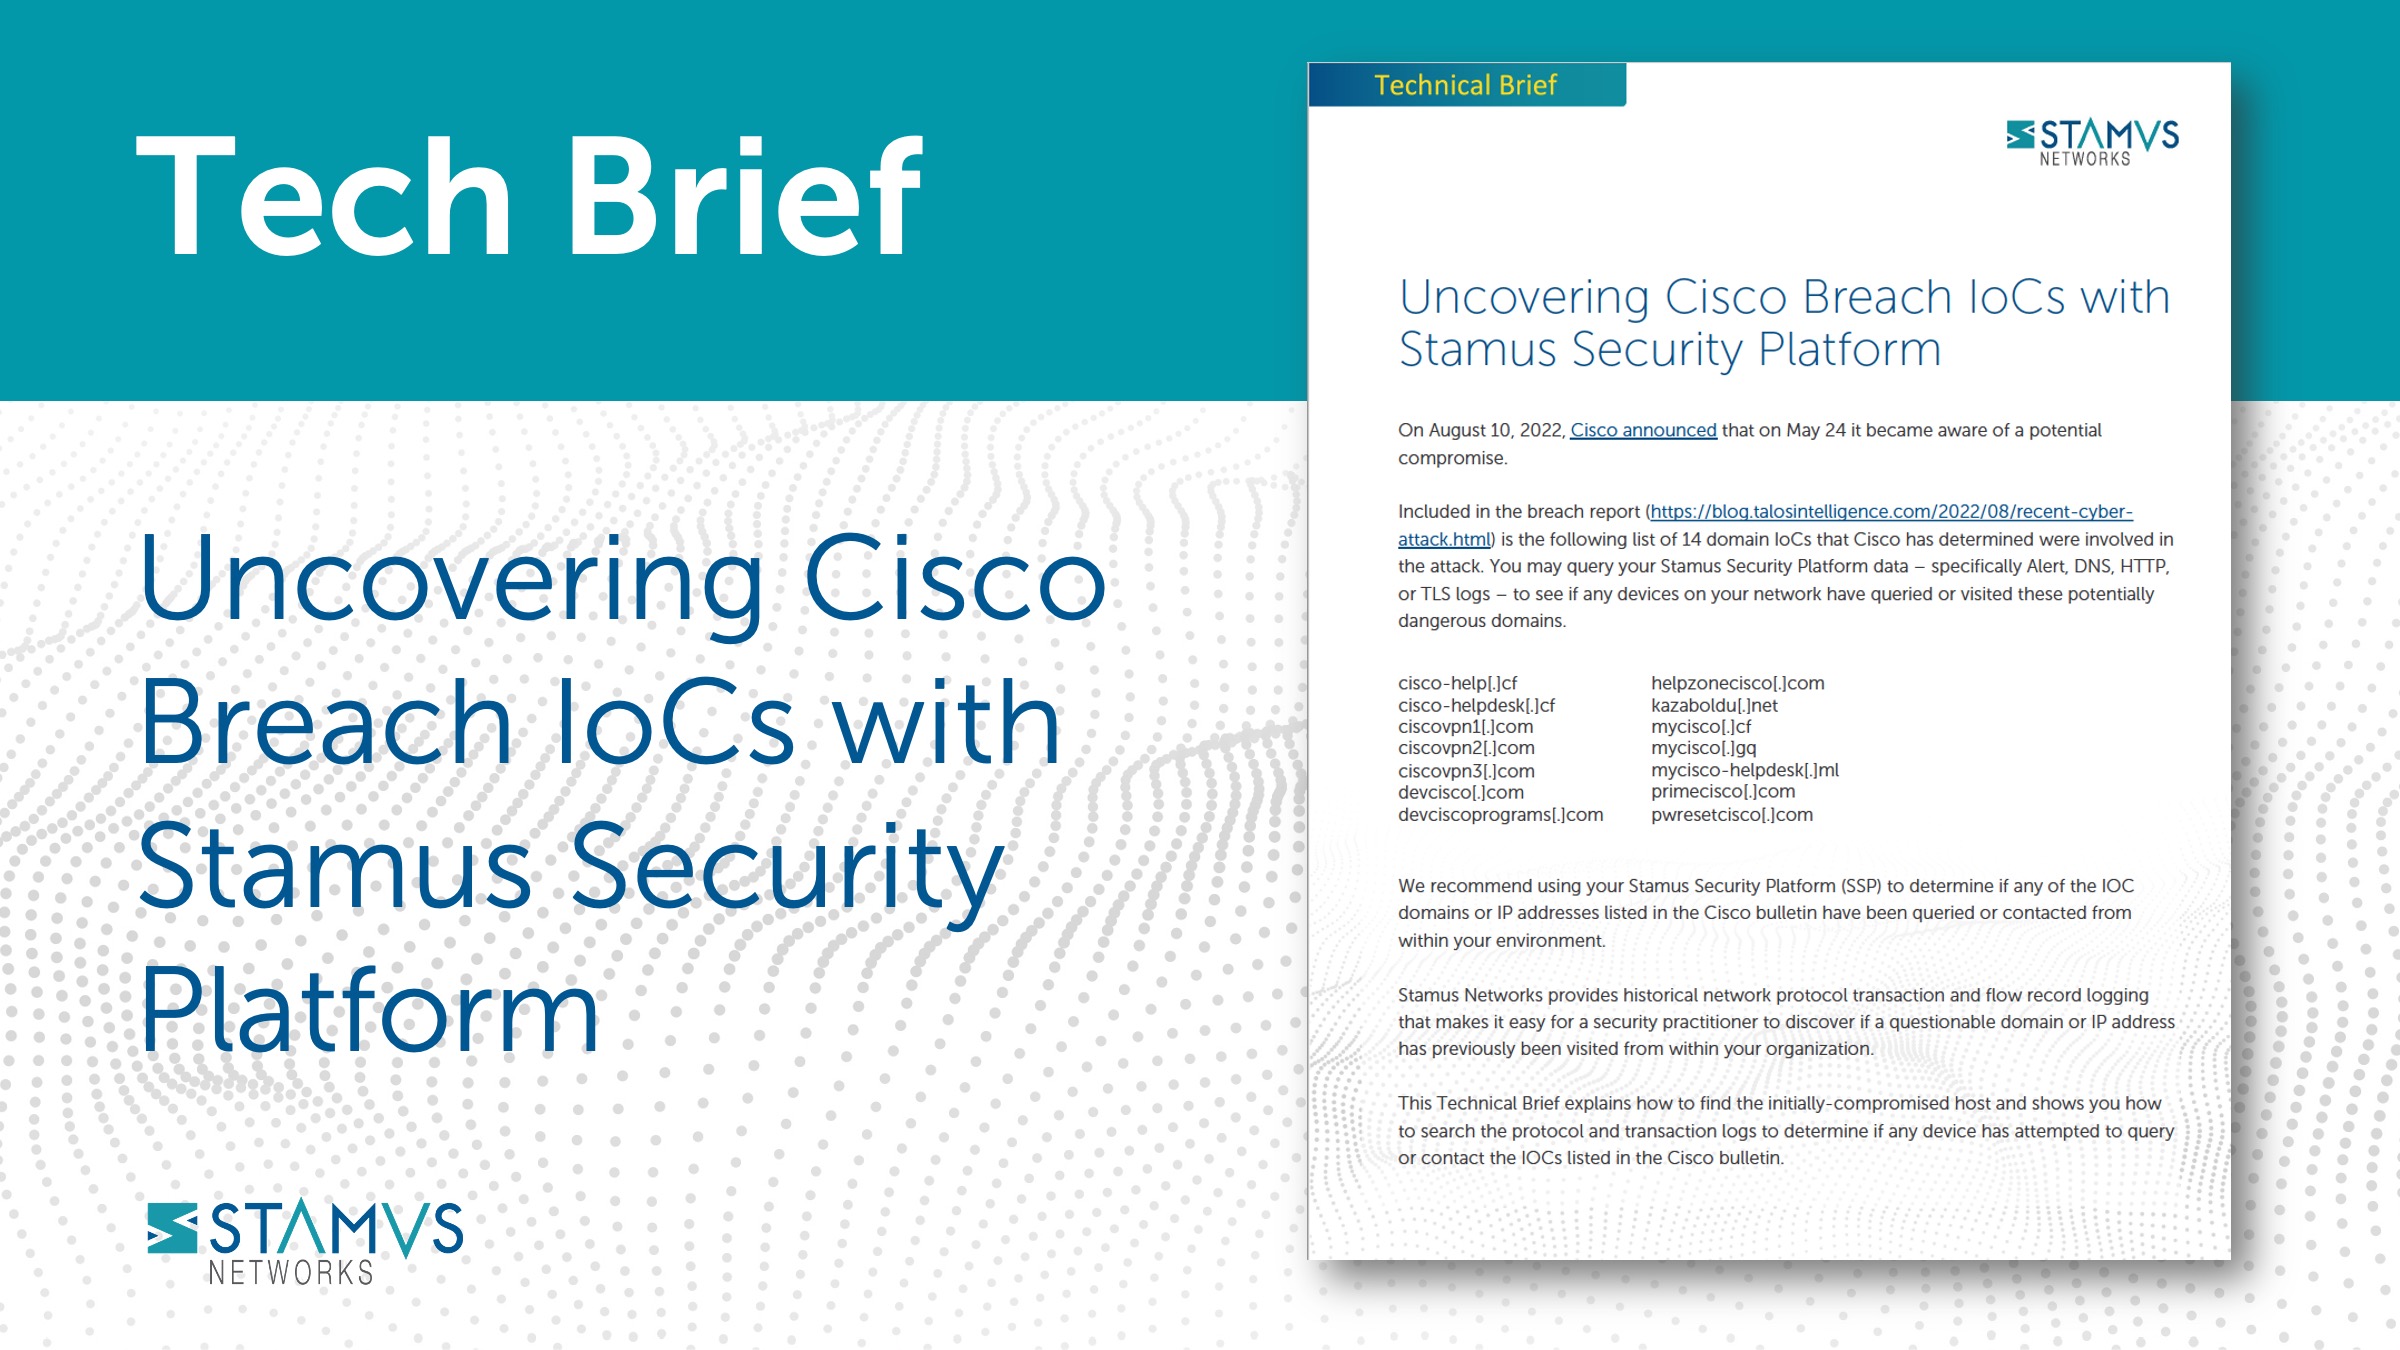 Uncovering Cisco Breach IoCs with Stamus Security Platform